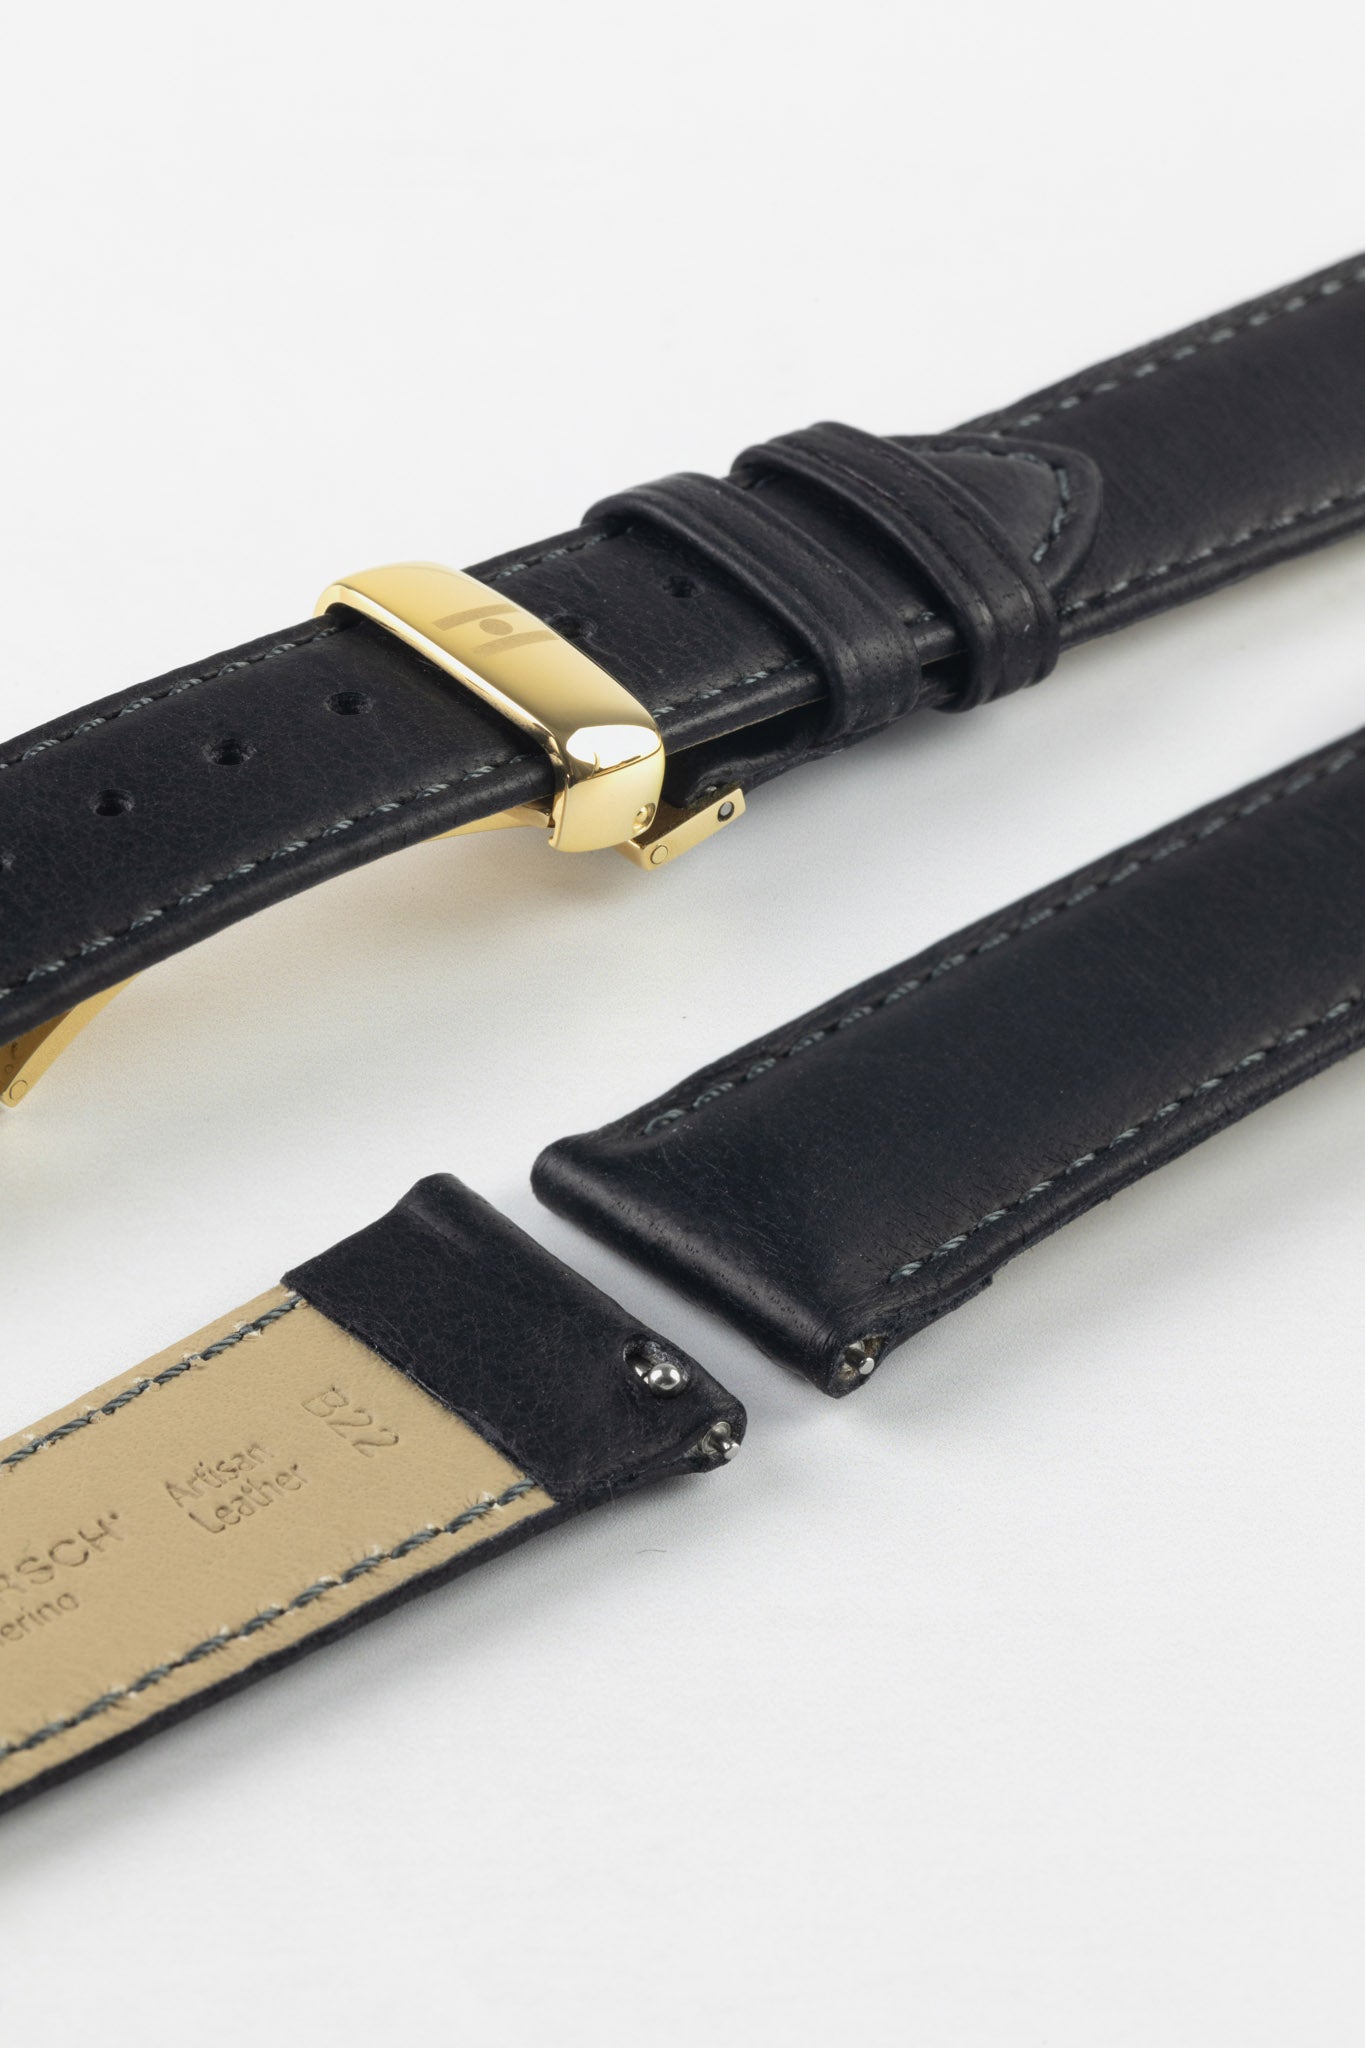 Strap Watch Type Whale Leather Genuine Black 0 23/32in " New